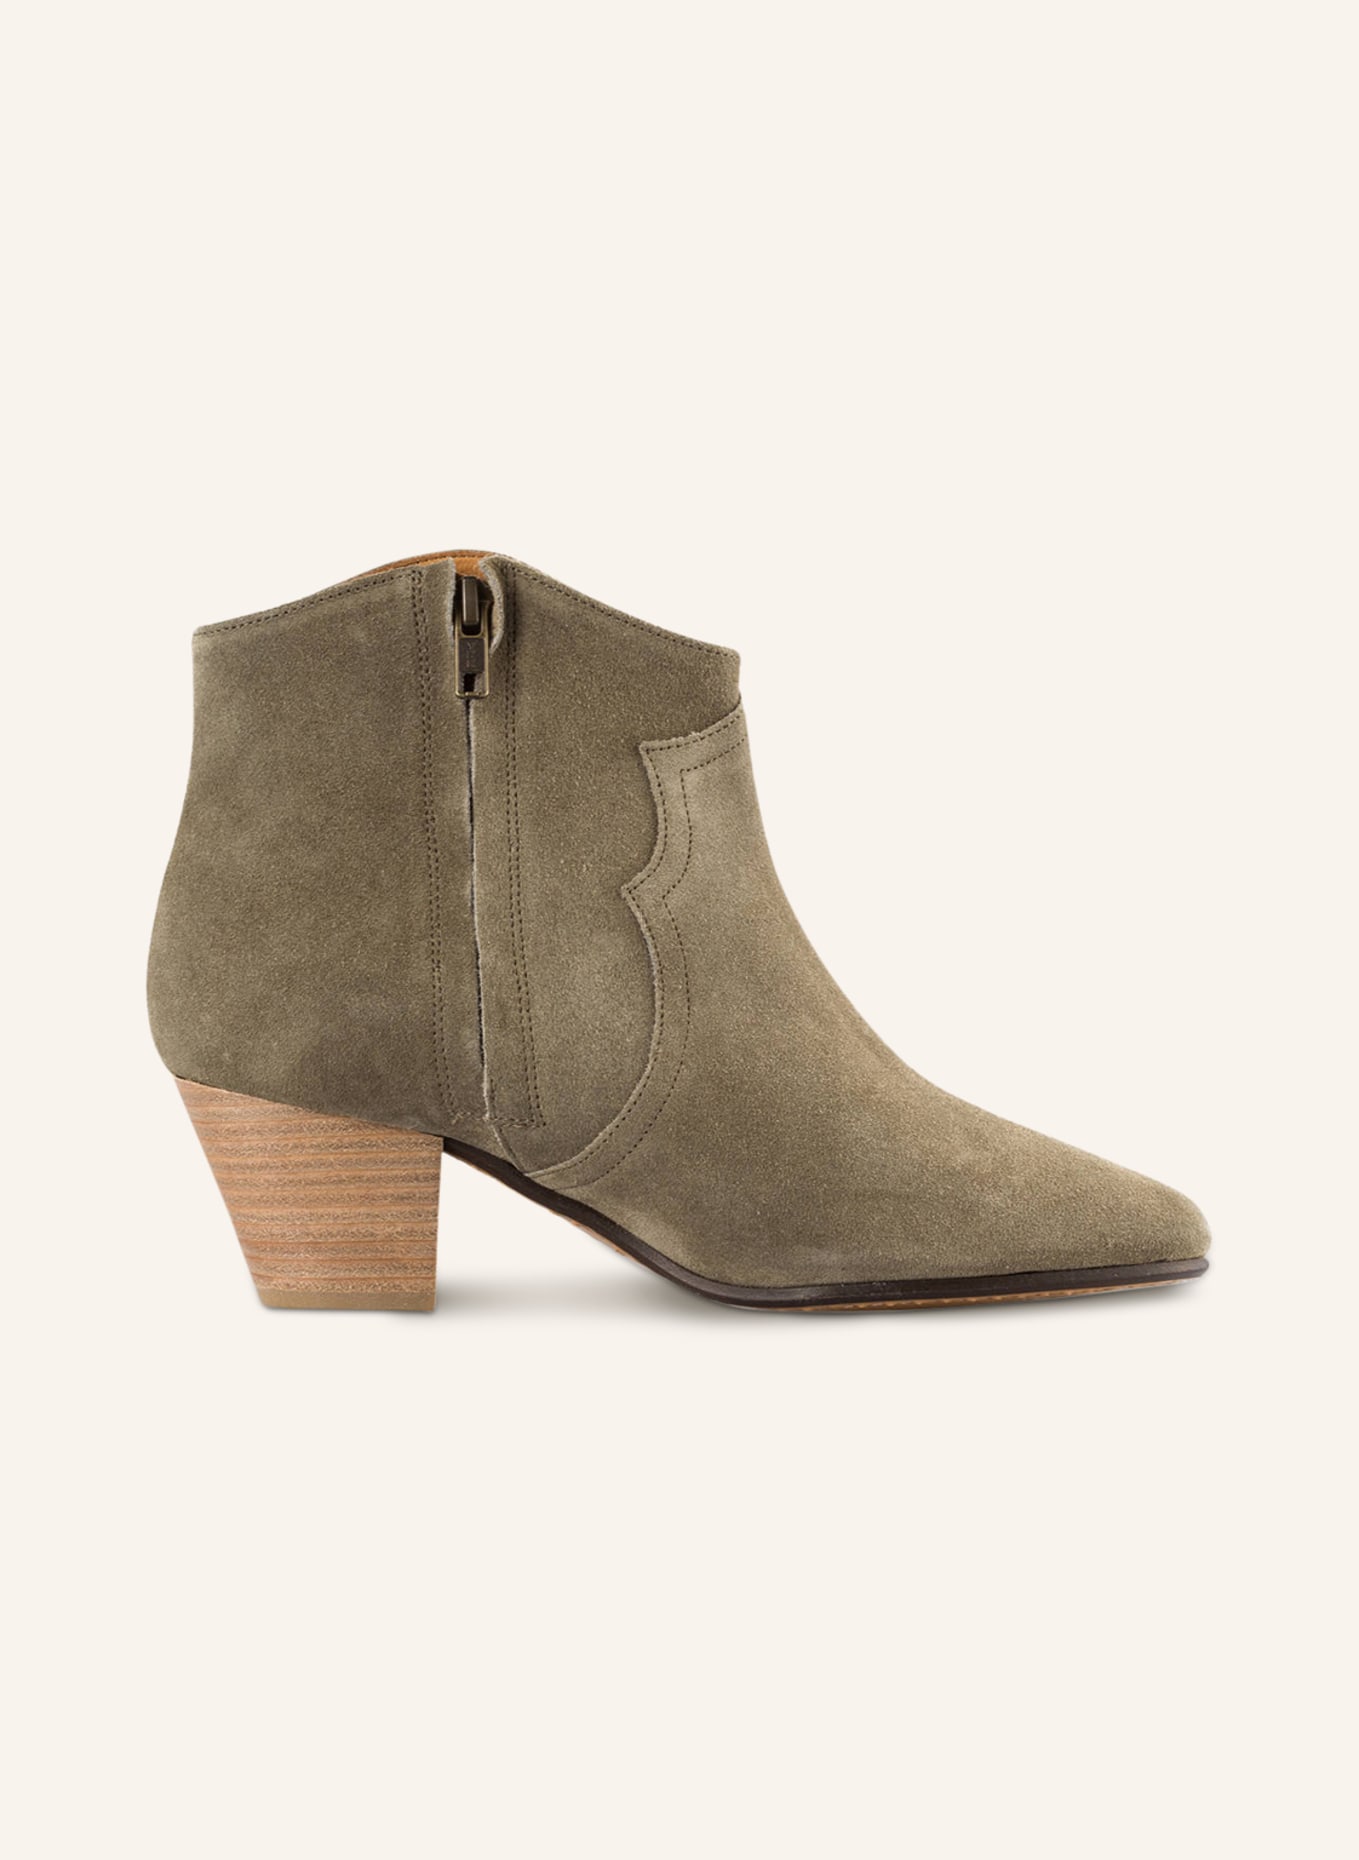 ISABEL MARANT Cowboy Boots DICKER, Farbe: TAUPE (Bild 5)